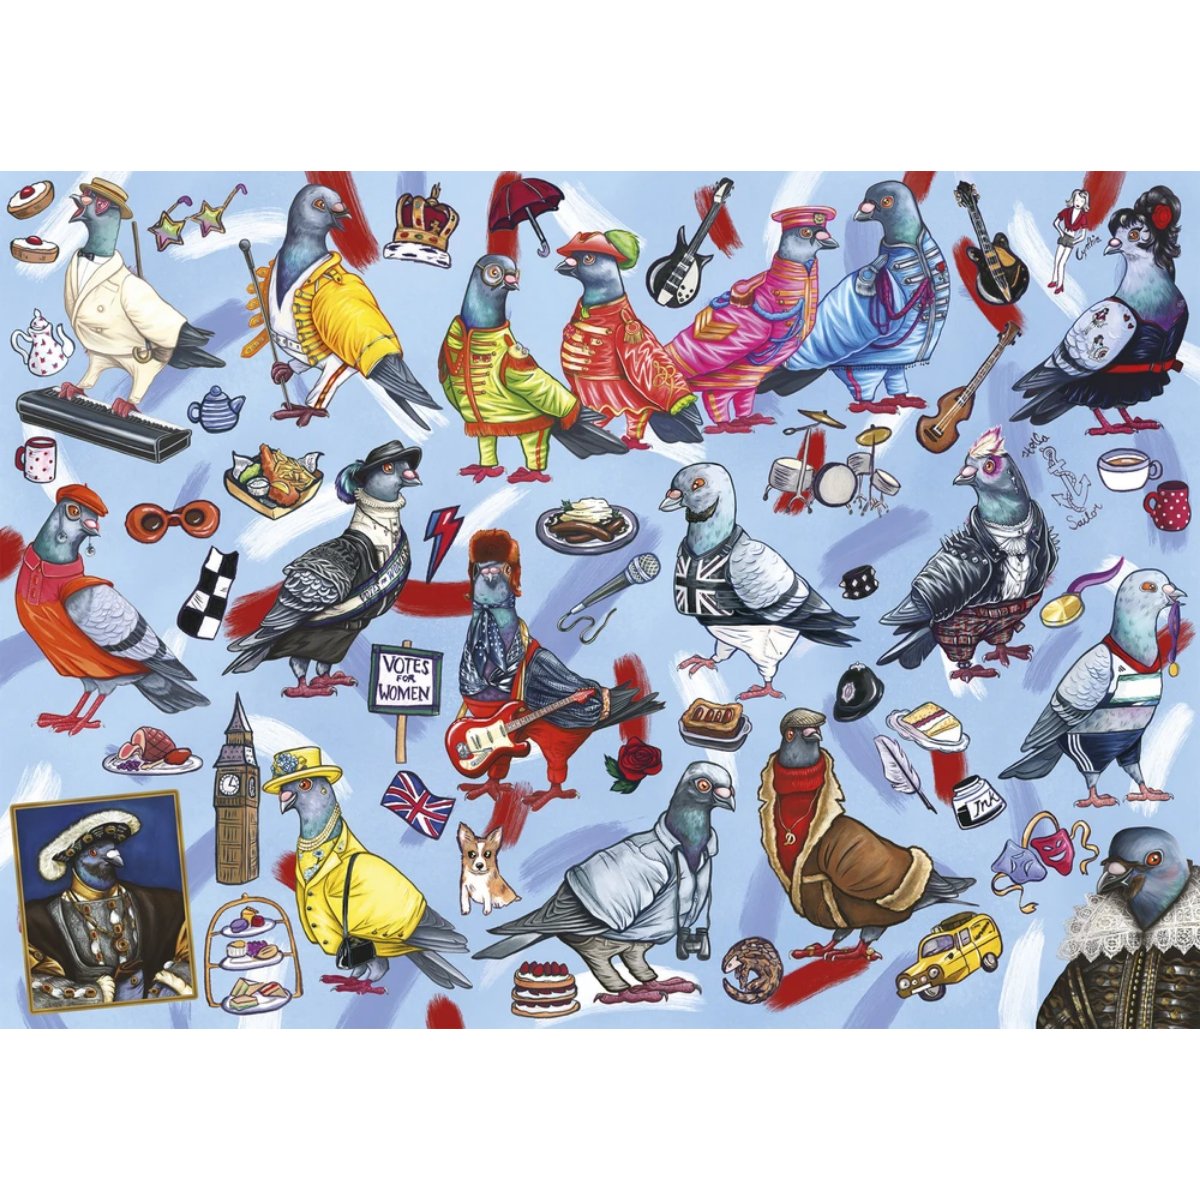 Gibsons Pigeons of Britain Jigsaw Puzzle (1000 Pieces)